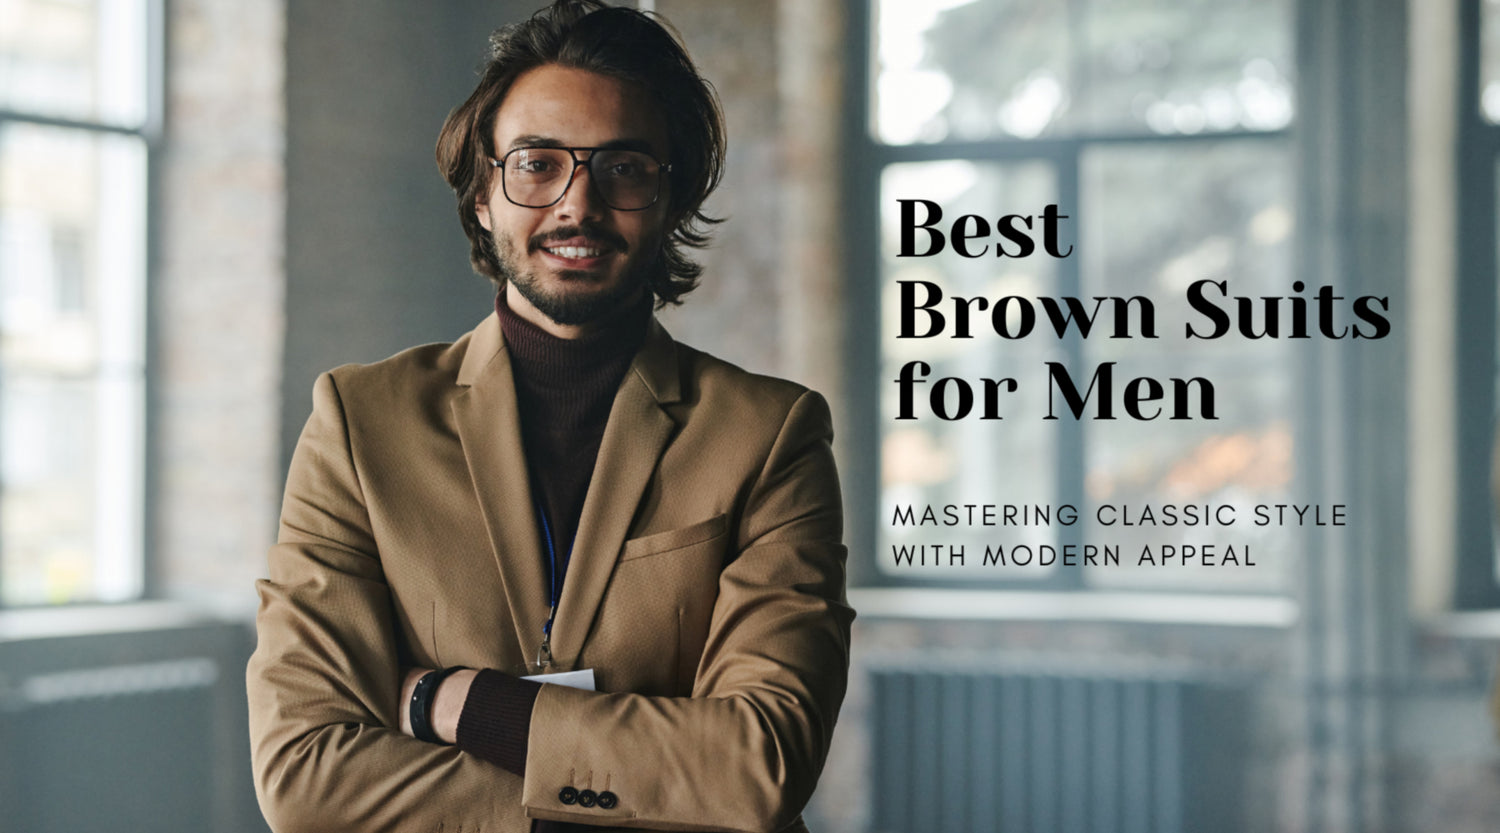 Best Brown Suits for Men: Mastering Classic Style with Modern Appeal